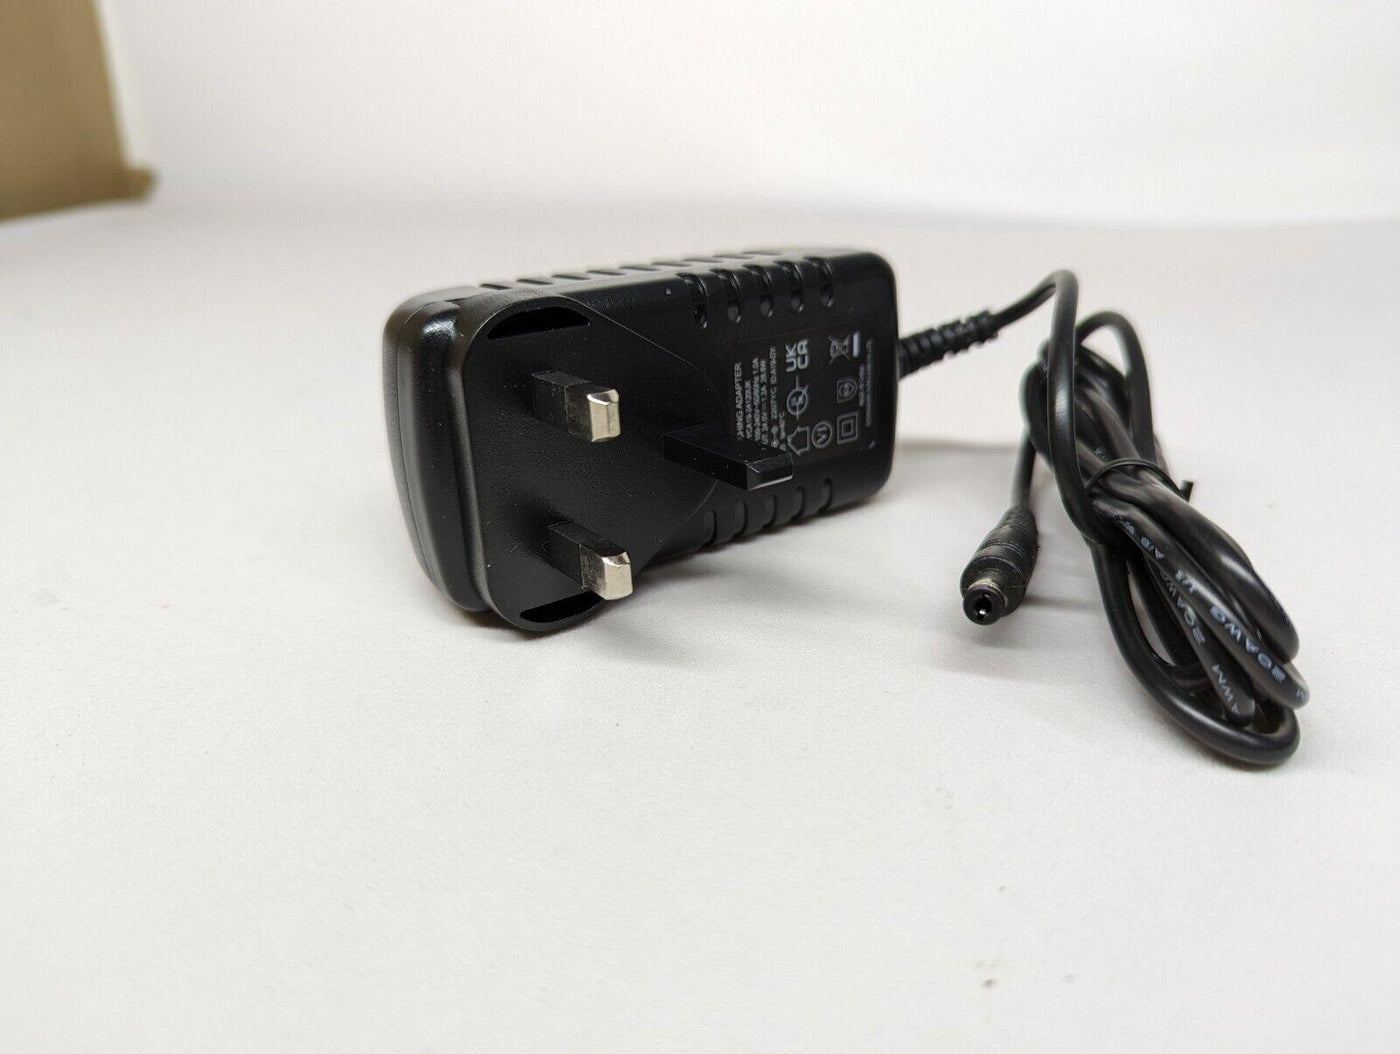 Replacement Switching Adapter Output 24v 1.2A 28.8w 100-240v Model YCA19-24120UK - Massive Discounts